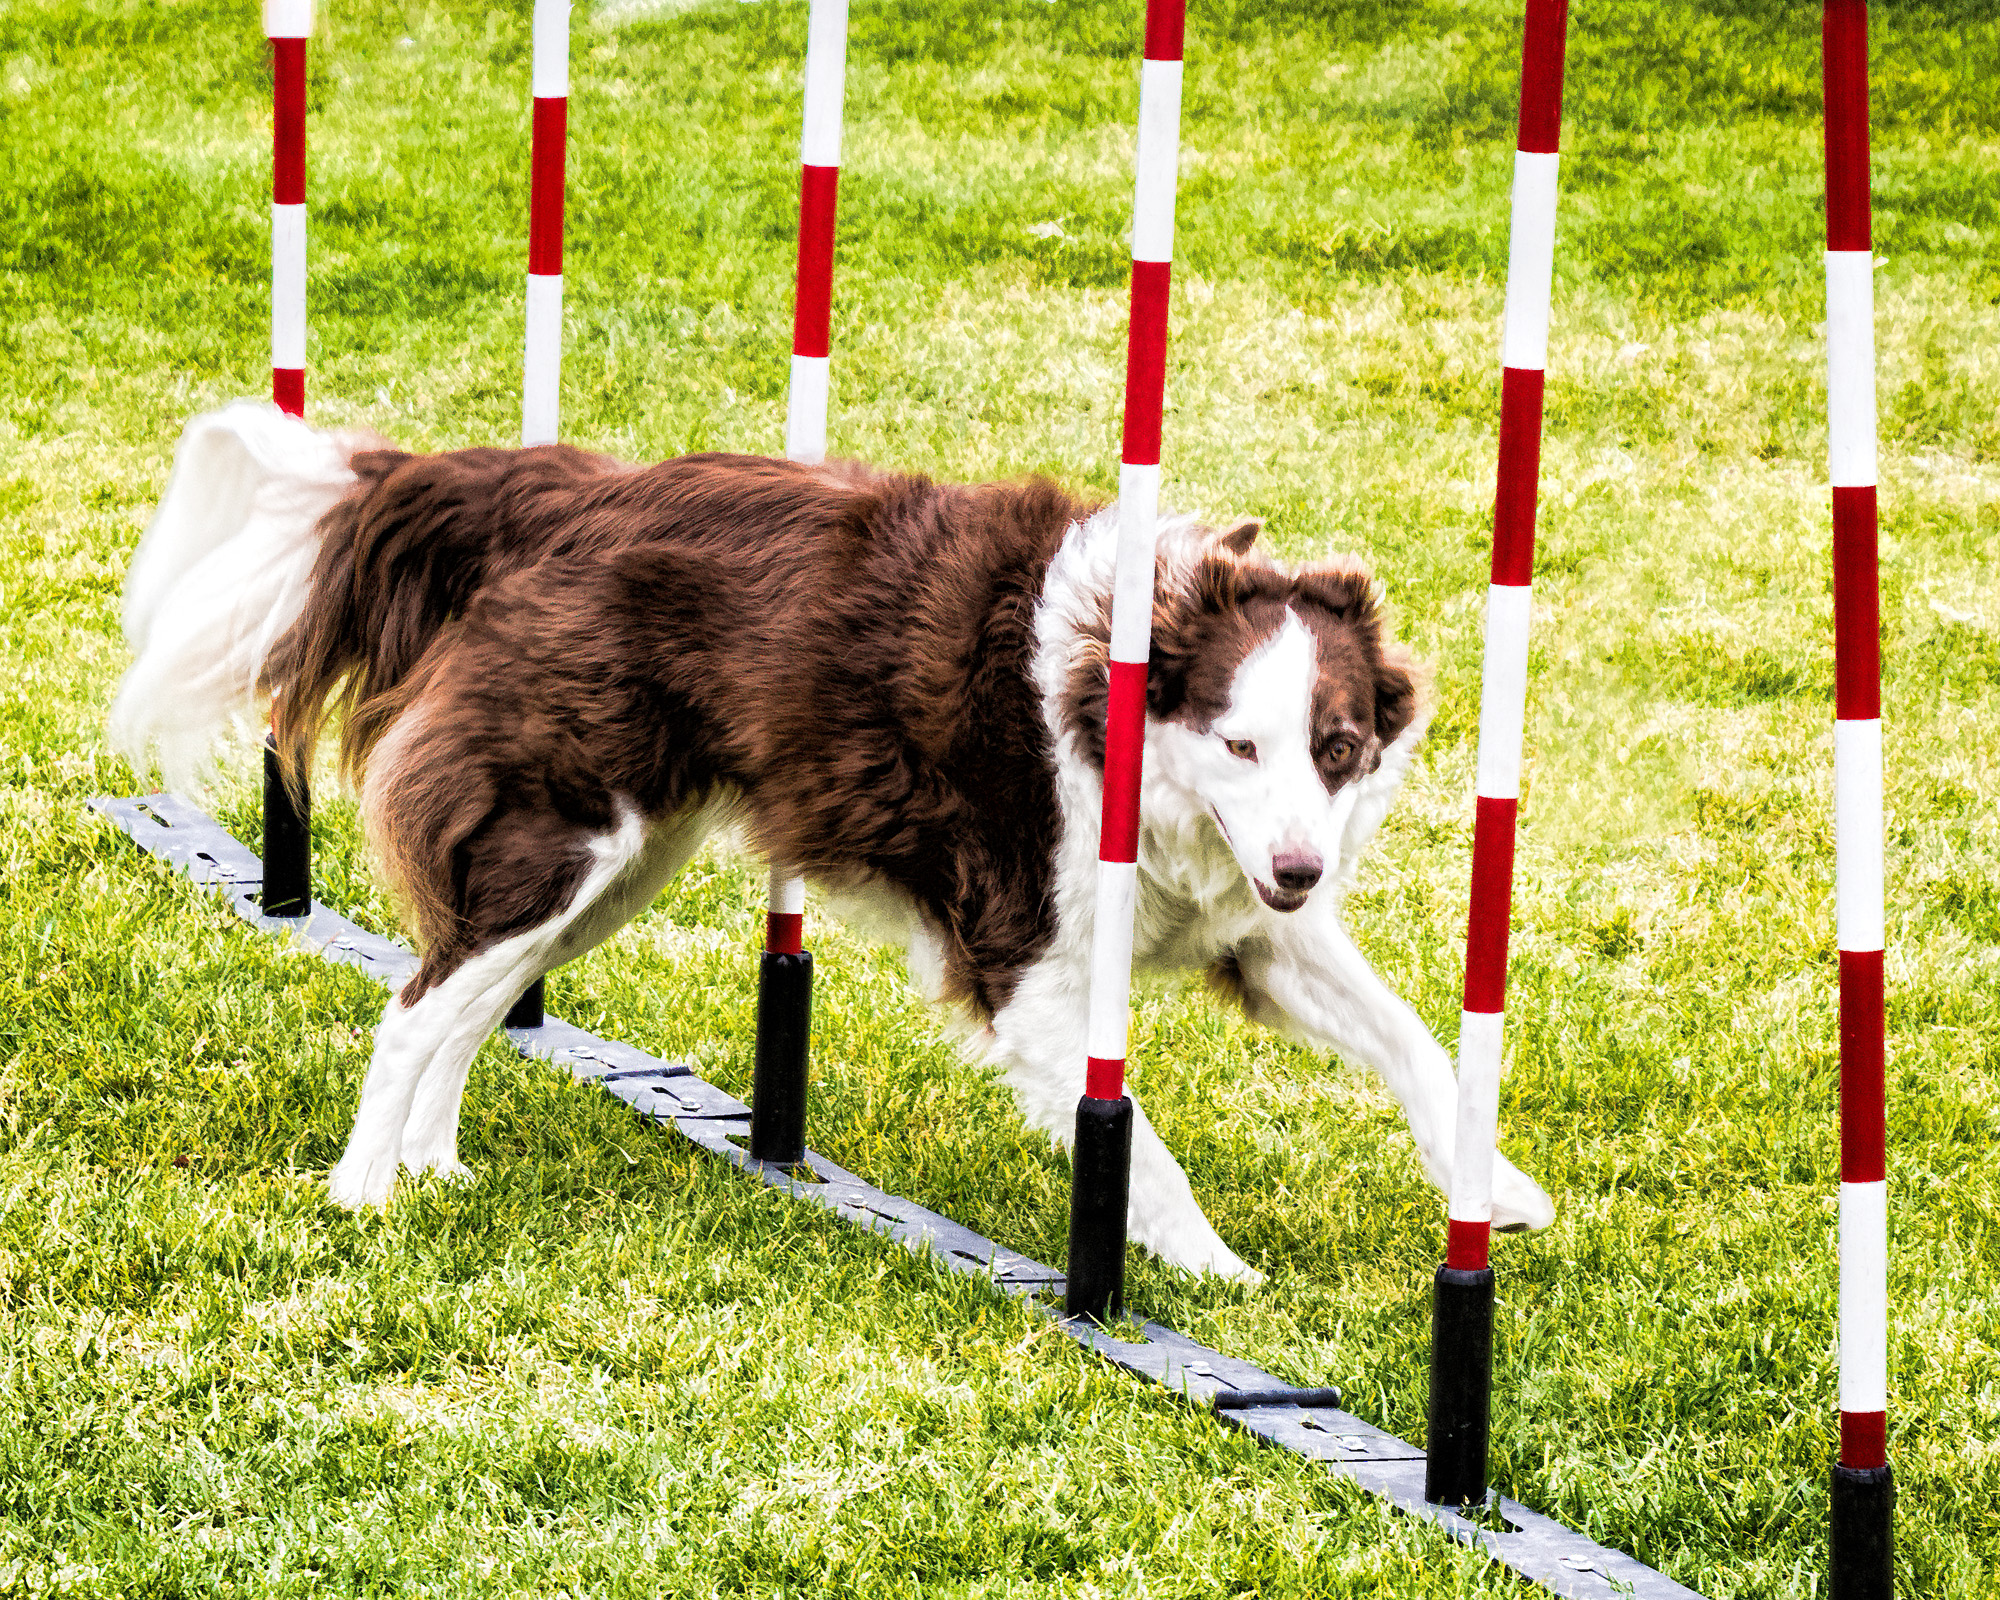 dog jumping over obstacles on a grassy field